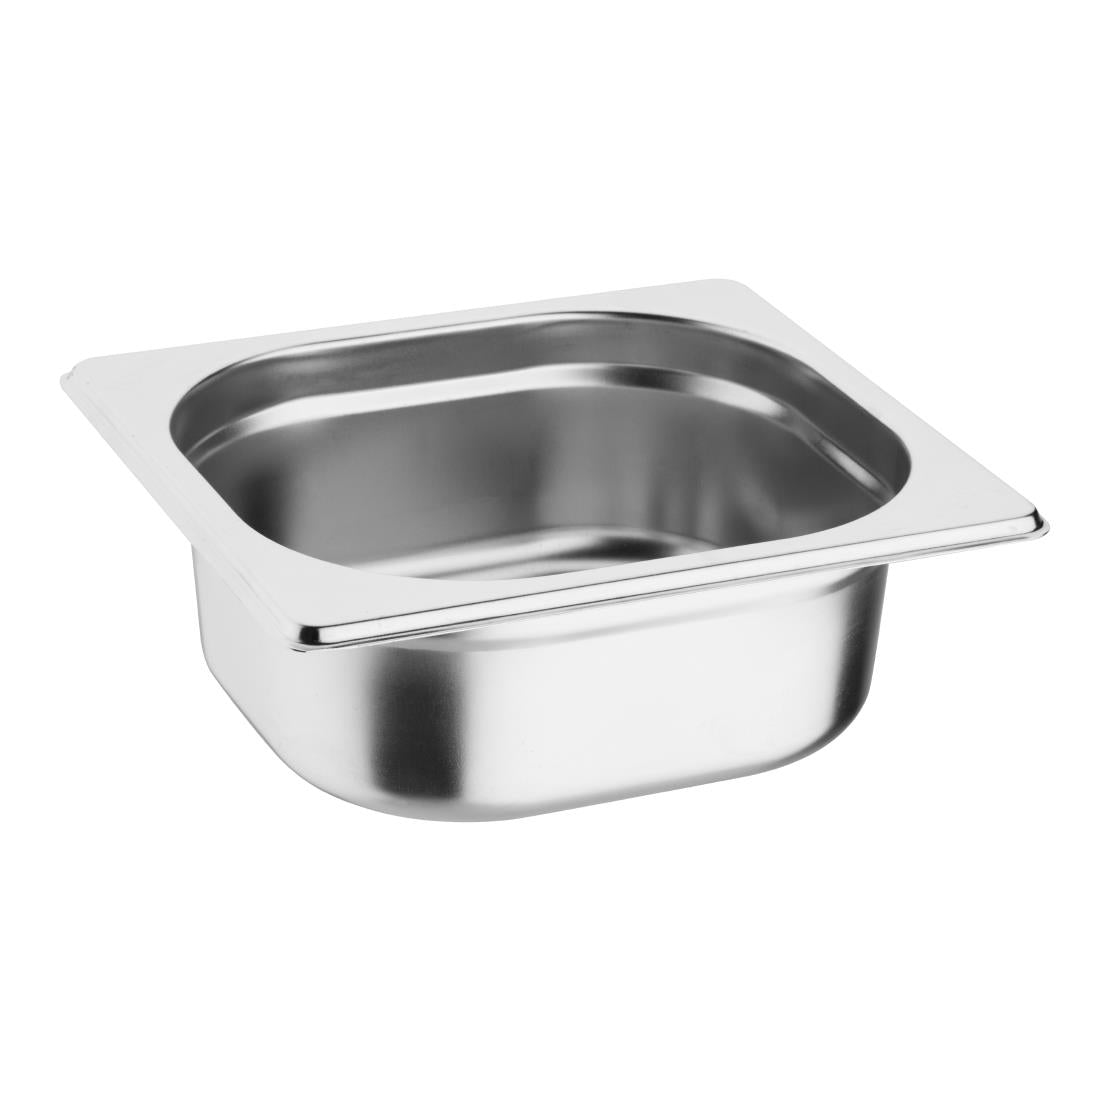 K985 Vogue Stainless Steel 1/6 Gastronorm Pan 65mm